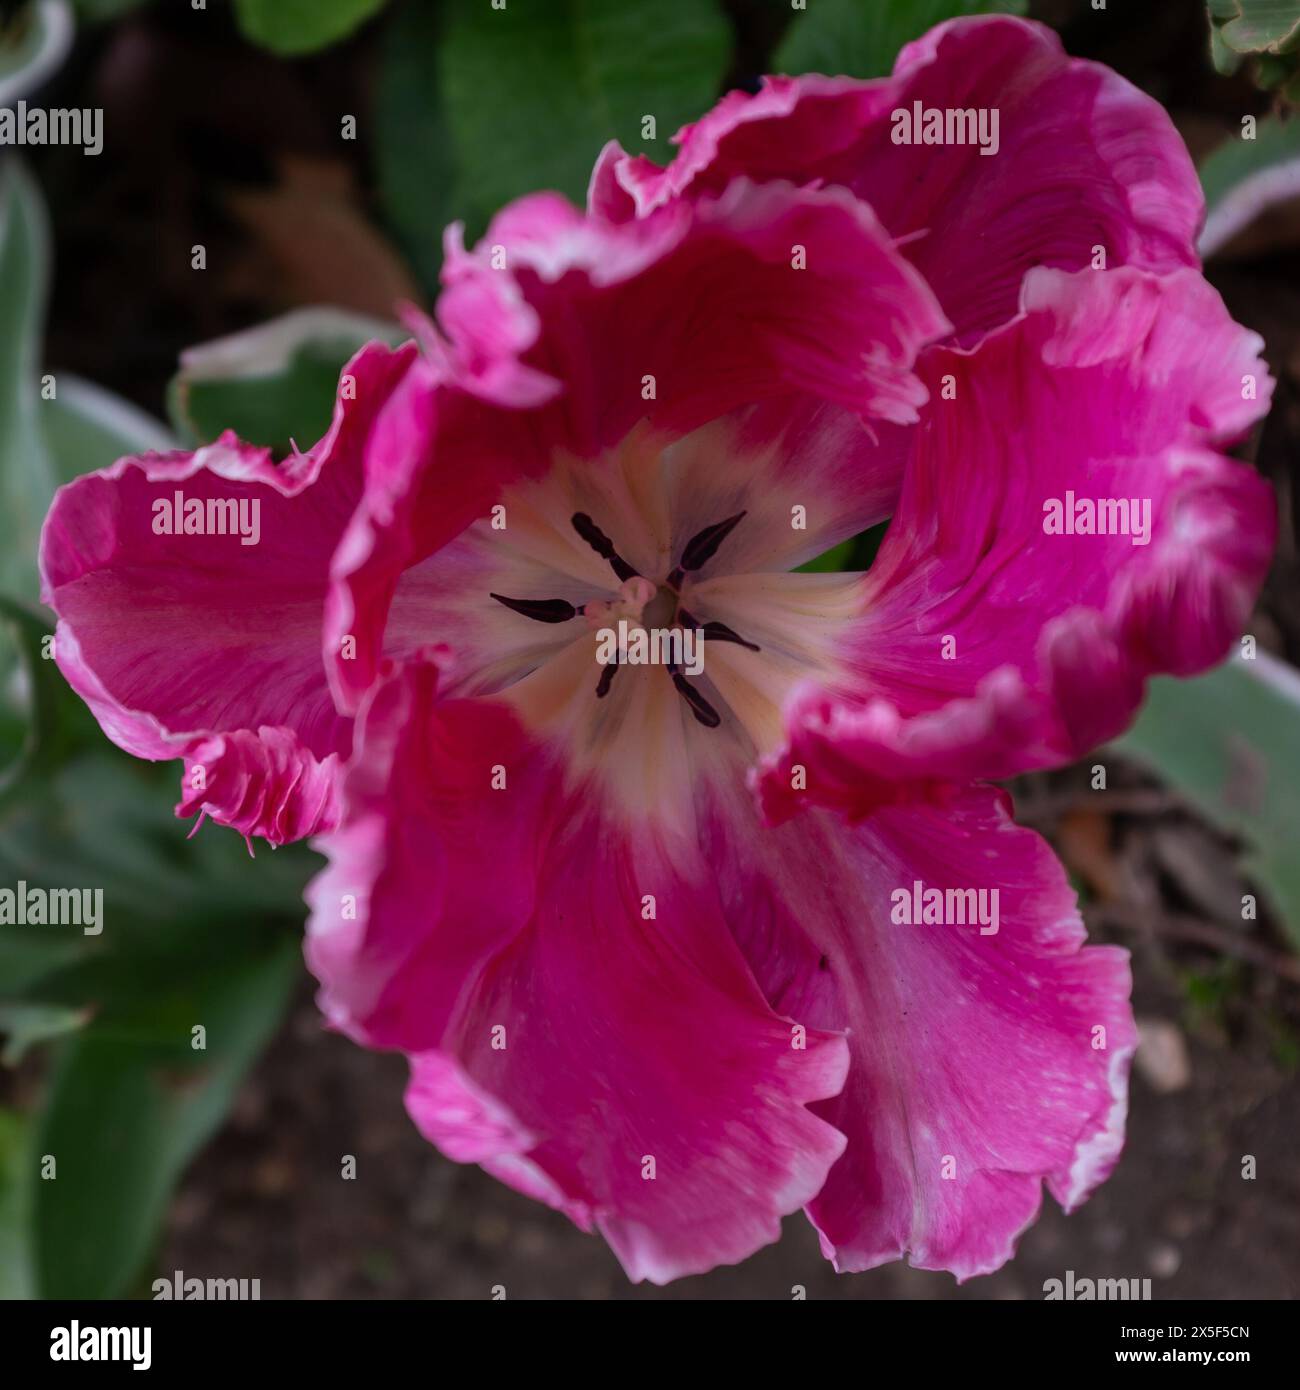 Top view of the curly and ruffled petals of a bright pink and white parrot tulip (Tulipa gesneriana) (square format) Stock Photo